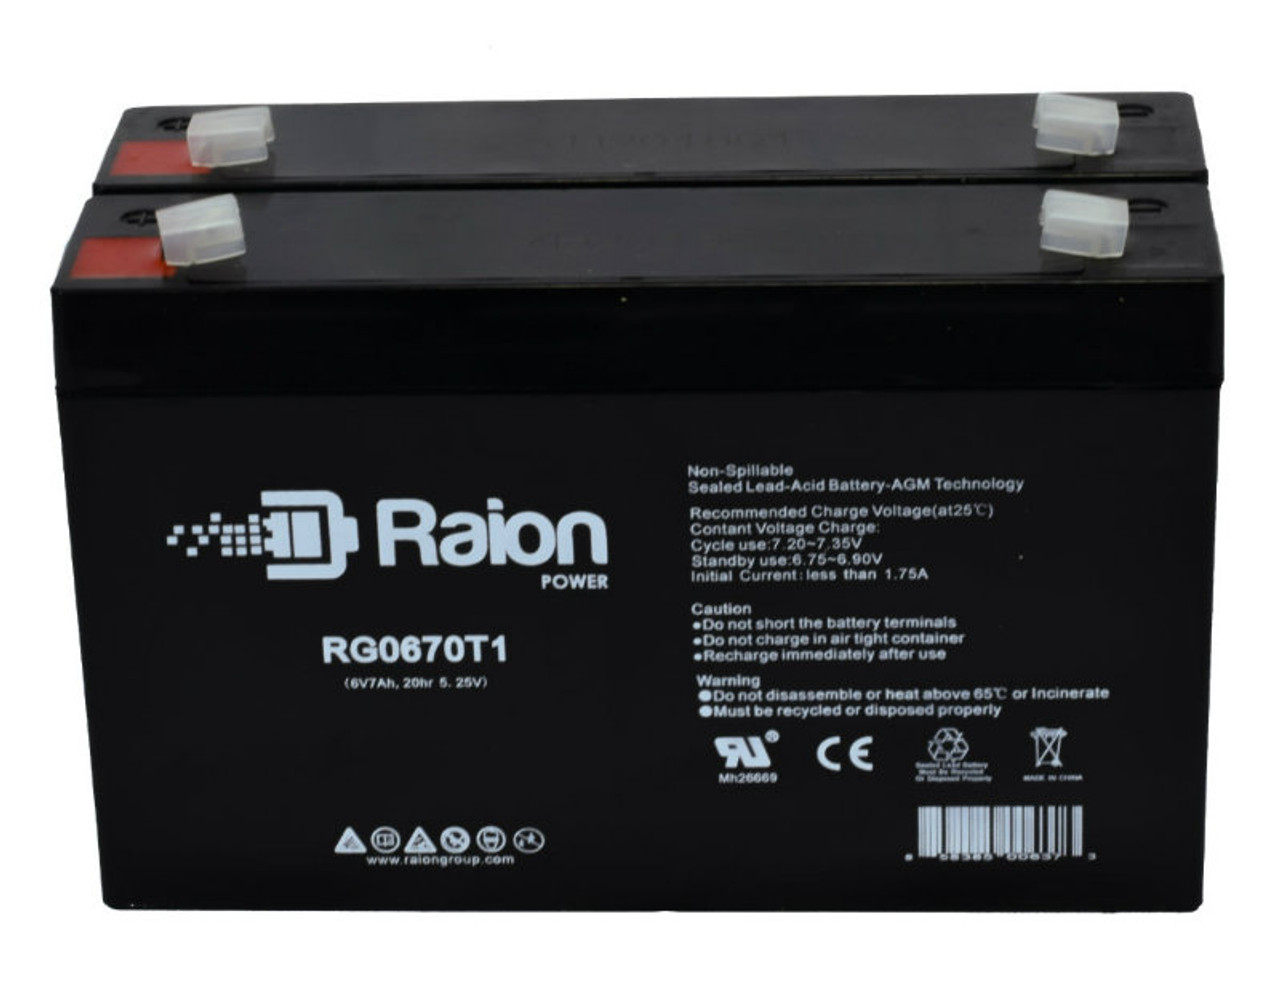 Raion Power RG0670T1 6V 7Ah Replacement Emergency Light Battery for Mule LLBEI - 2 Pack